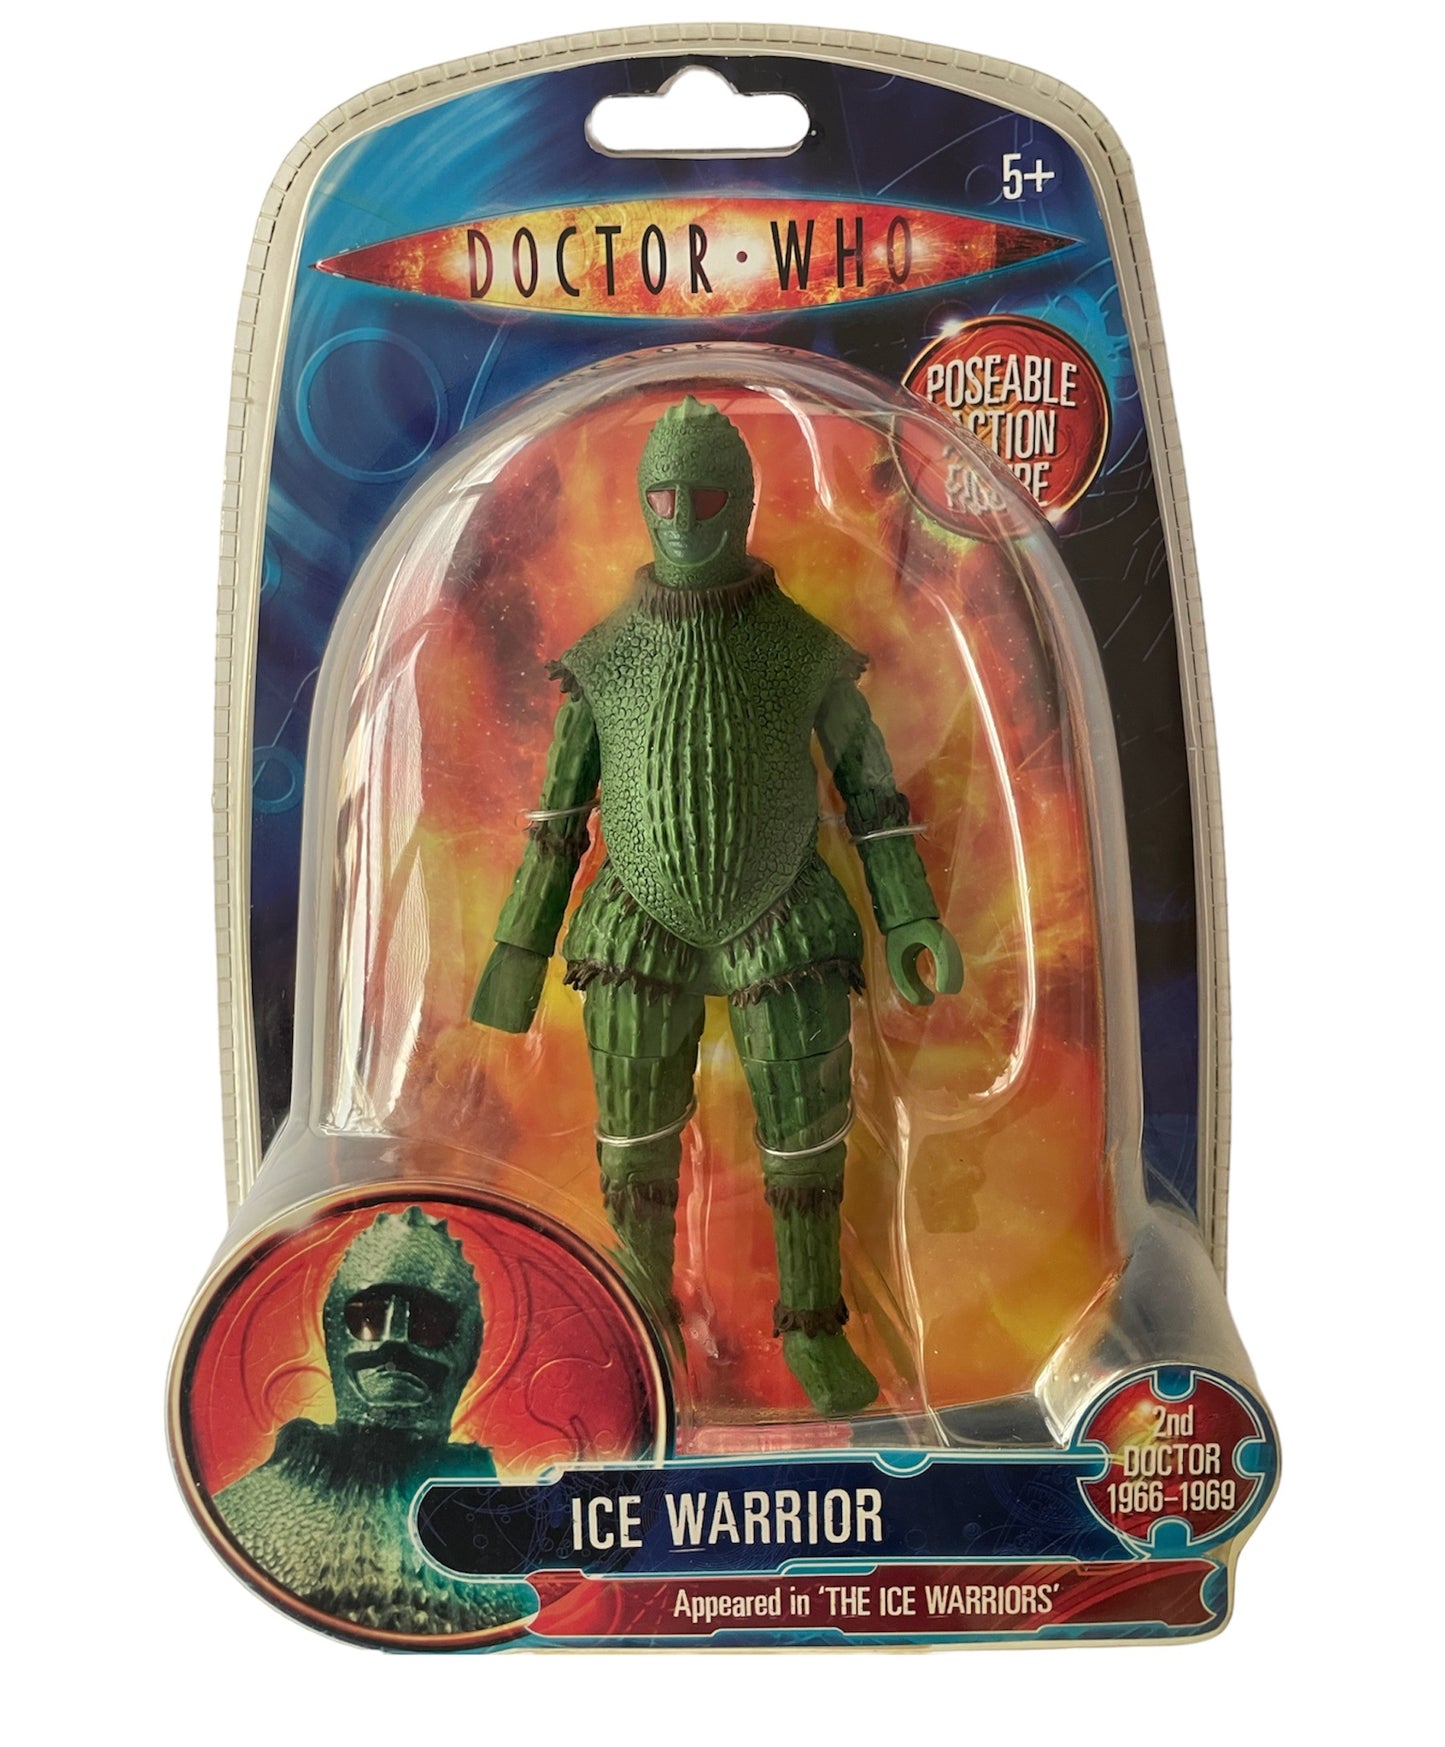 Vintage 1996 Doctor Dr Who Classic Series - Ice Warrior Action Figure - The Ice Warriors - Brand New Factory Sealed Shop Stock Room Find